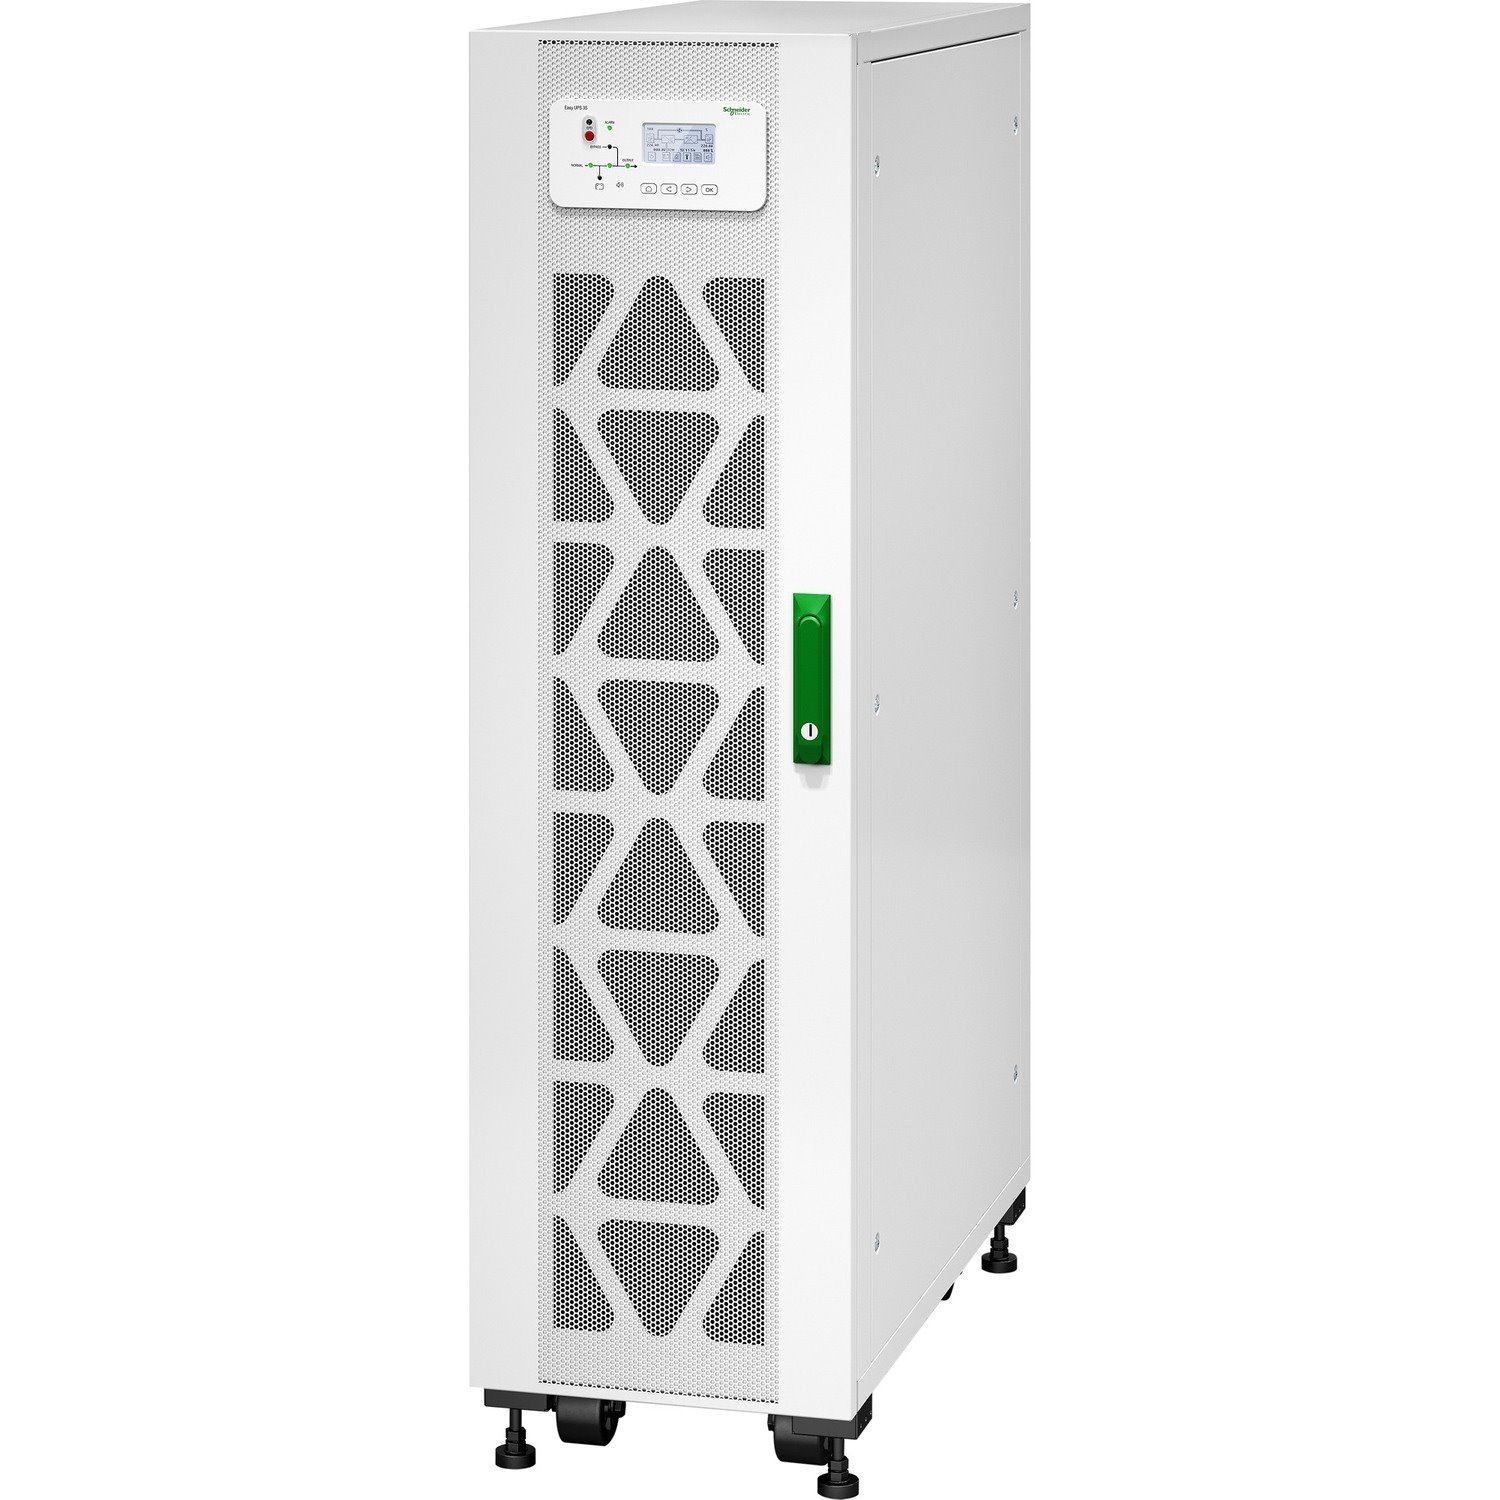 E3SUPS10K3IB APC by Schneider Electric Easy UPS 3S Double Conversion Online UPS - 10 kVA - Three Phase